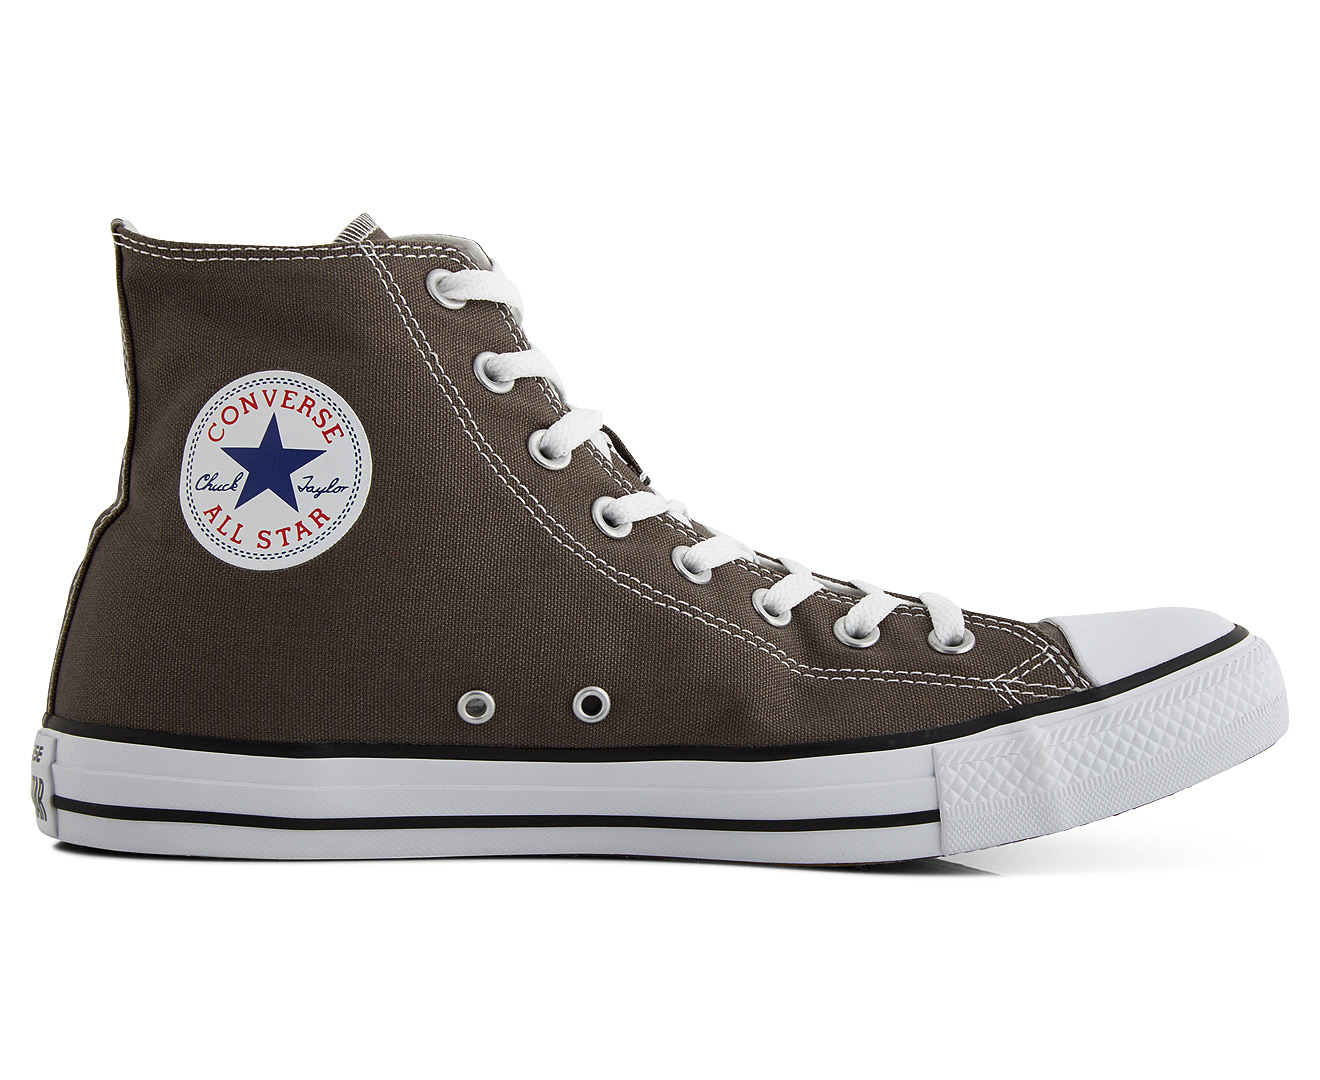 Converse Chuck Taylor Unisex All Star High Top Shoe - Charcoal | Catch ...